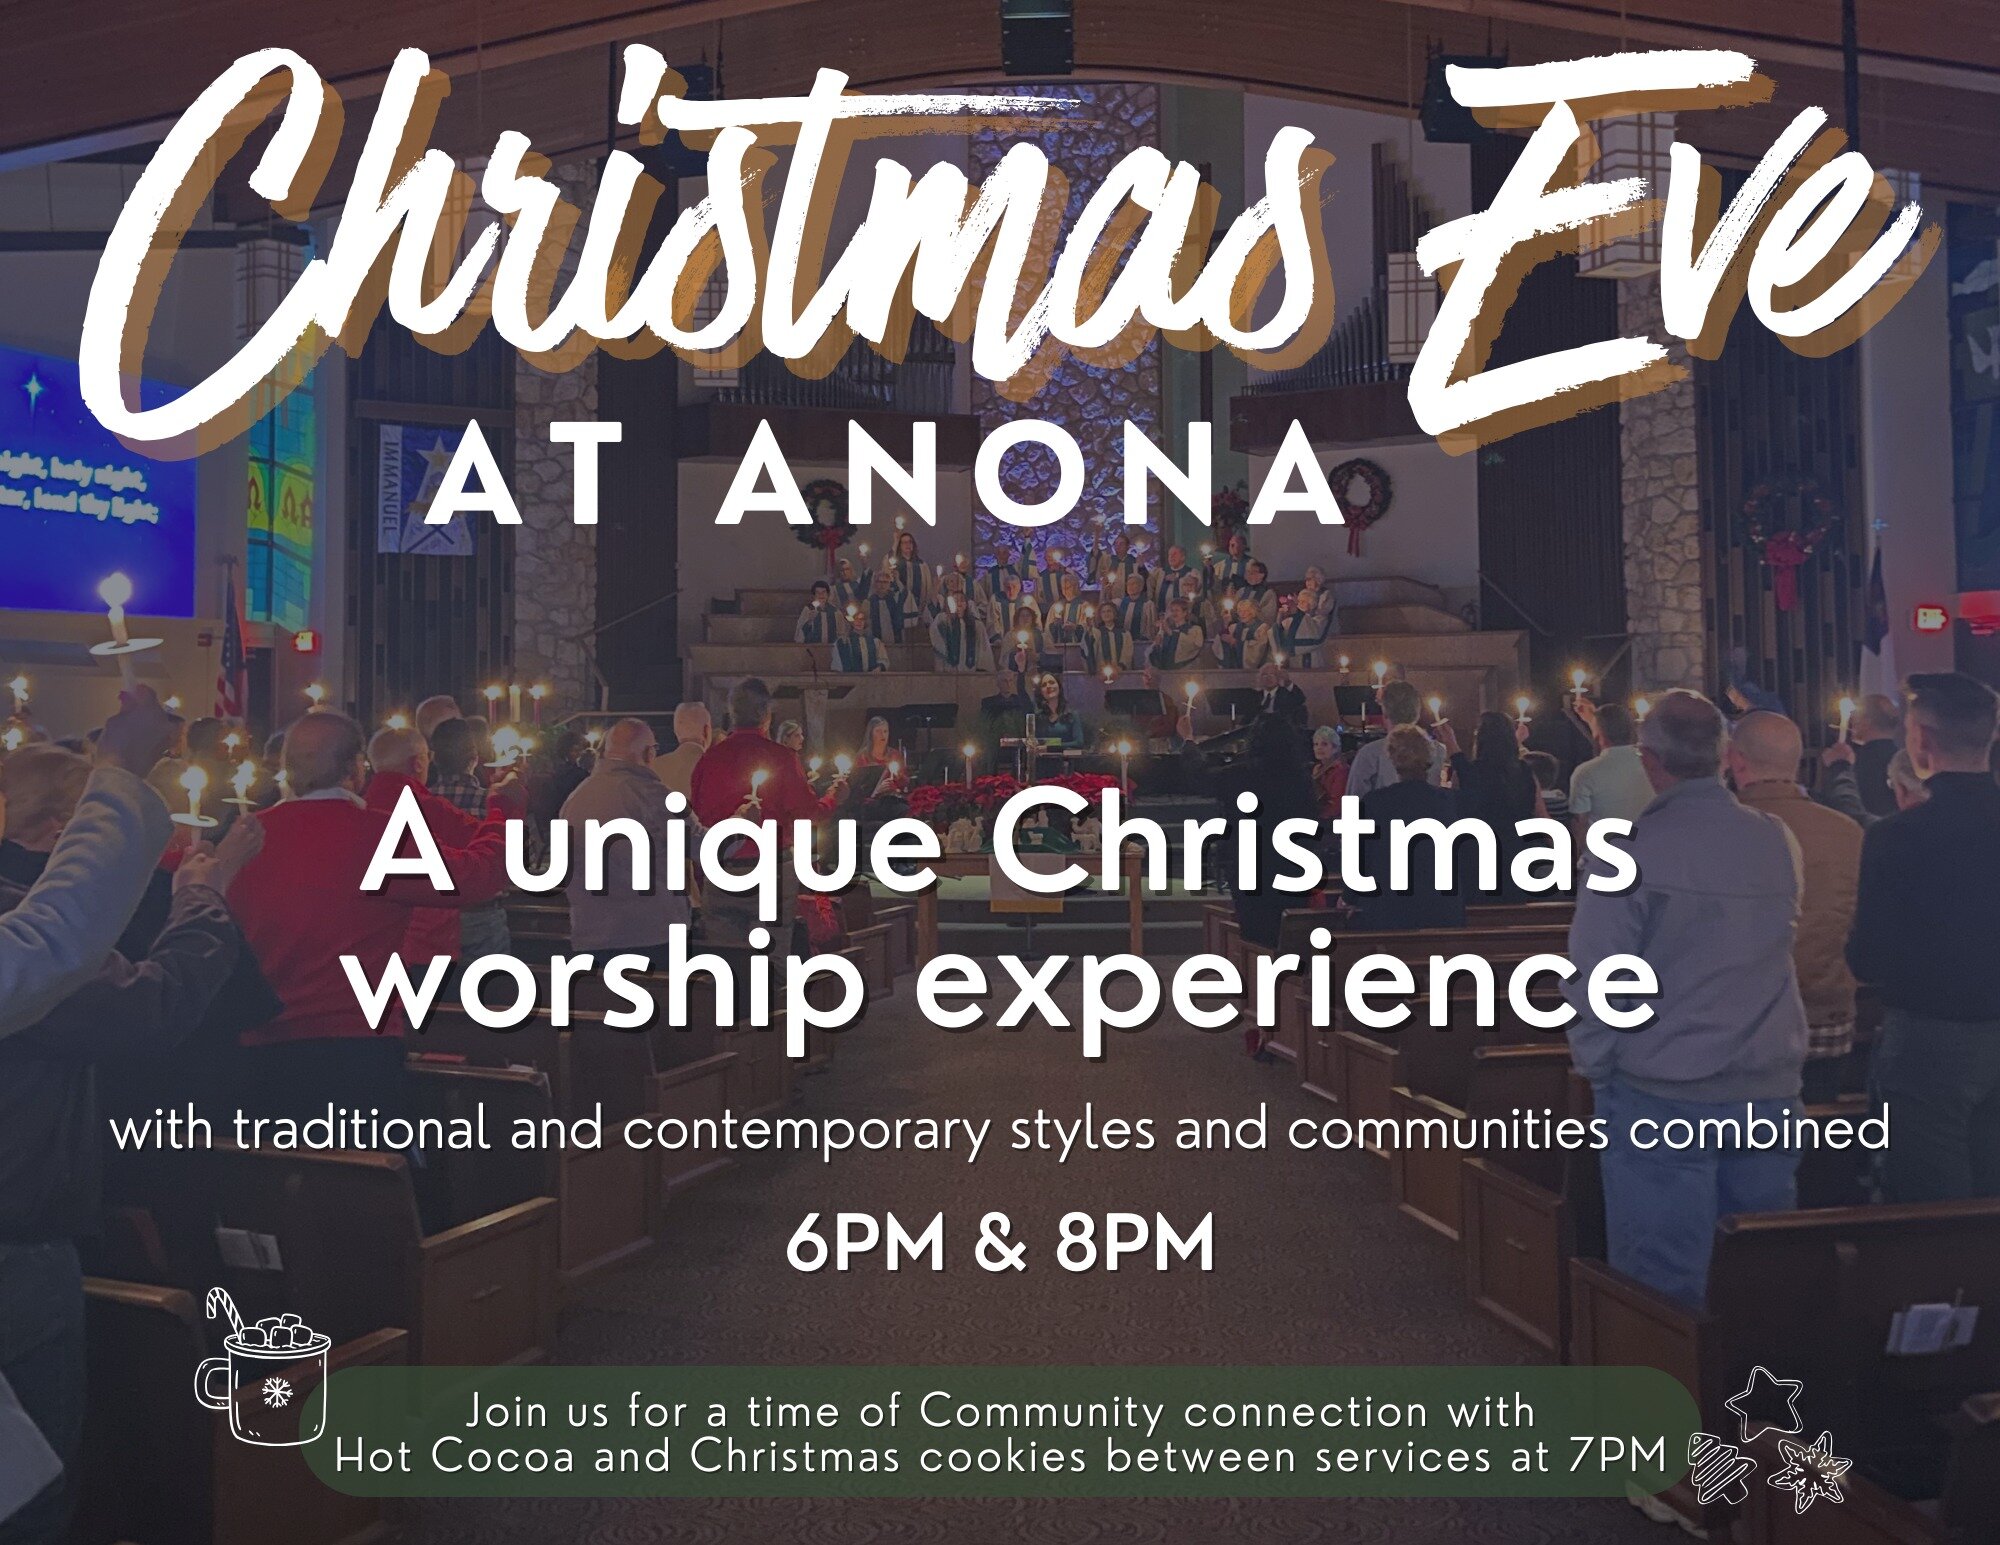 Have you already made your Christmas Eve plans? Join us for our unique Christmas worship experience at 6PM or 8PM, with quality community time in between!